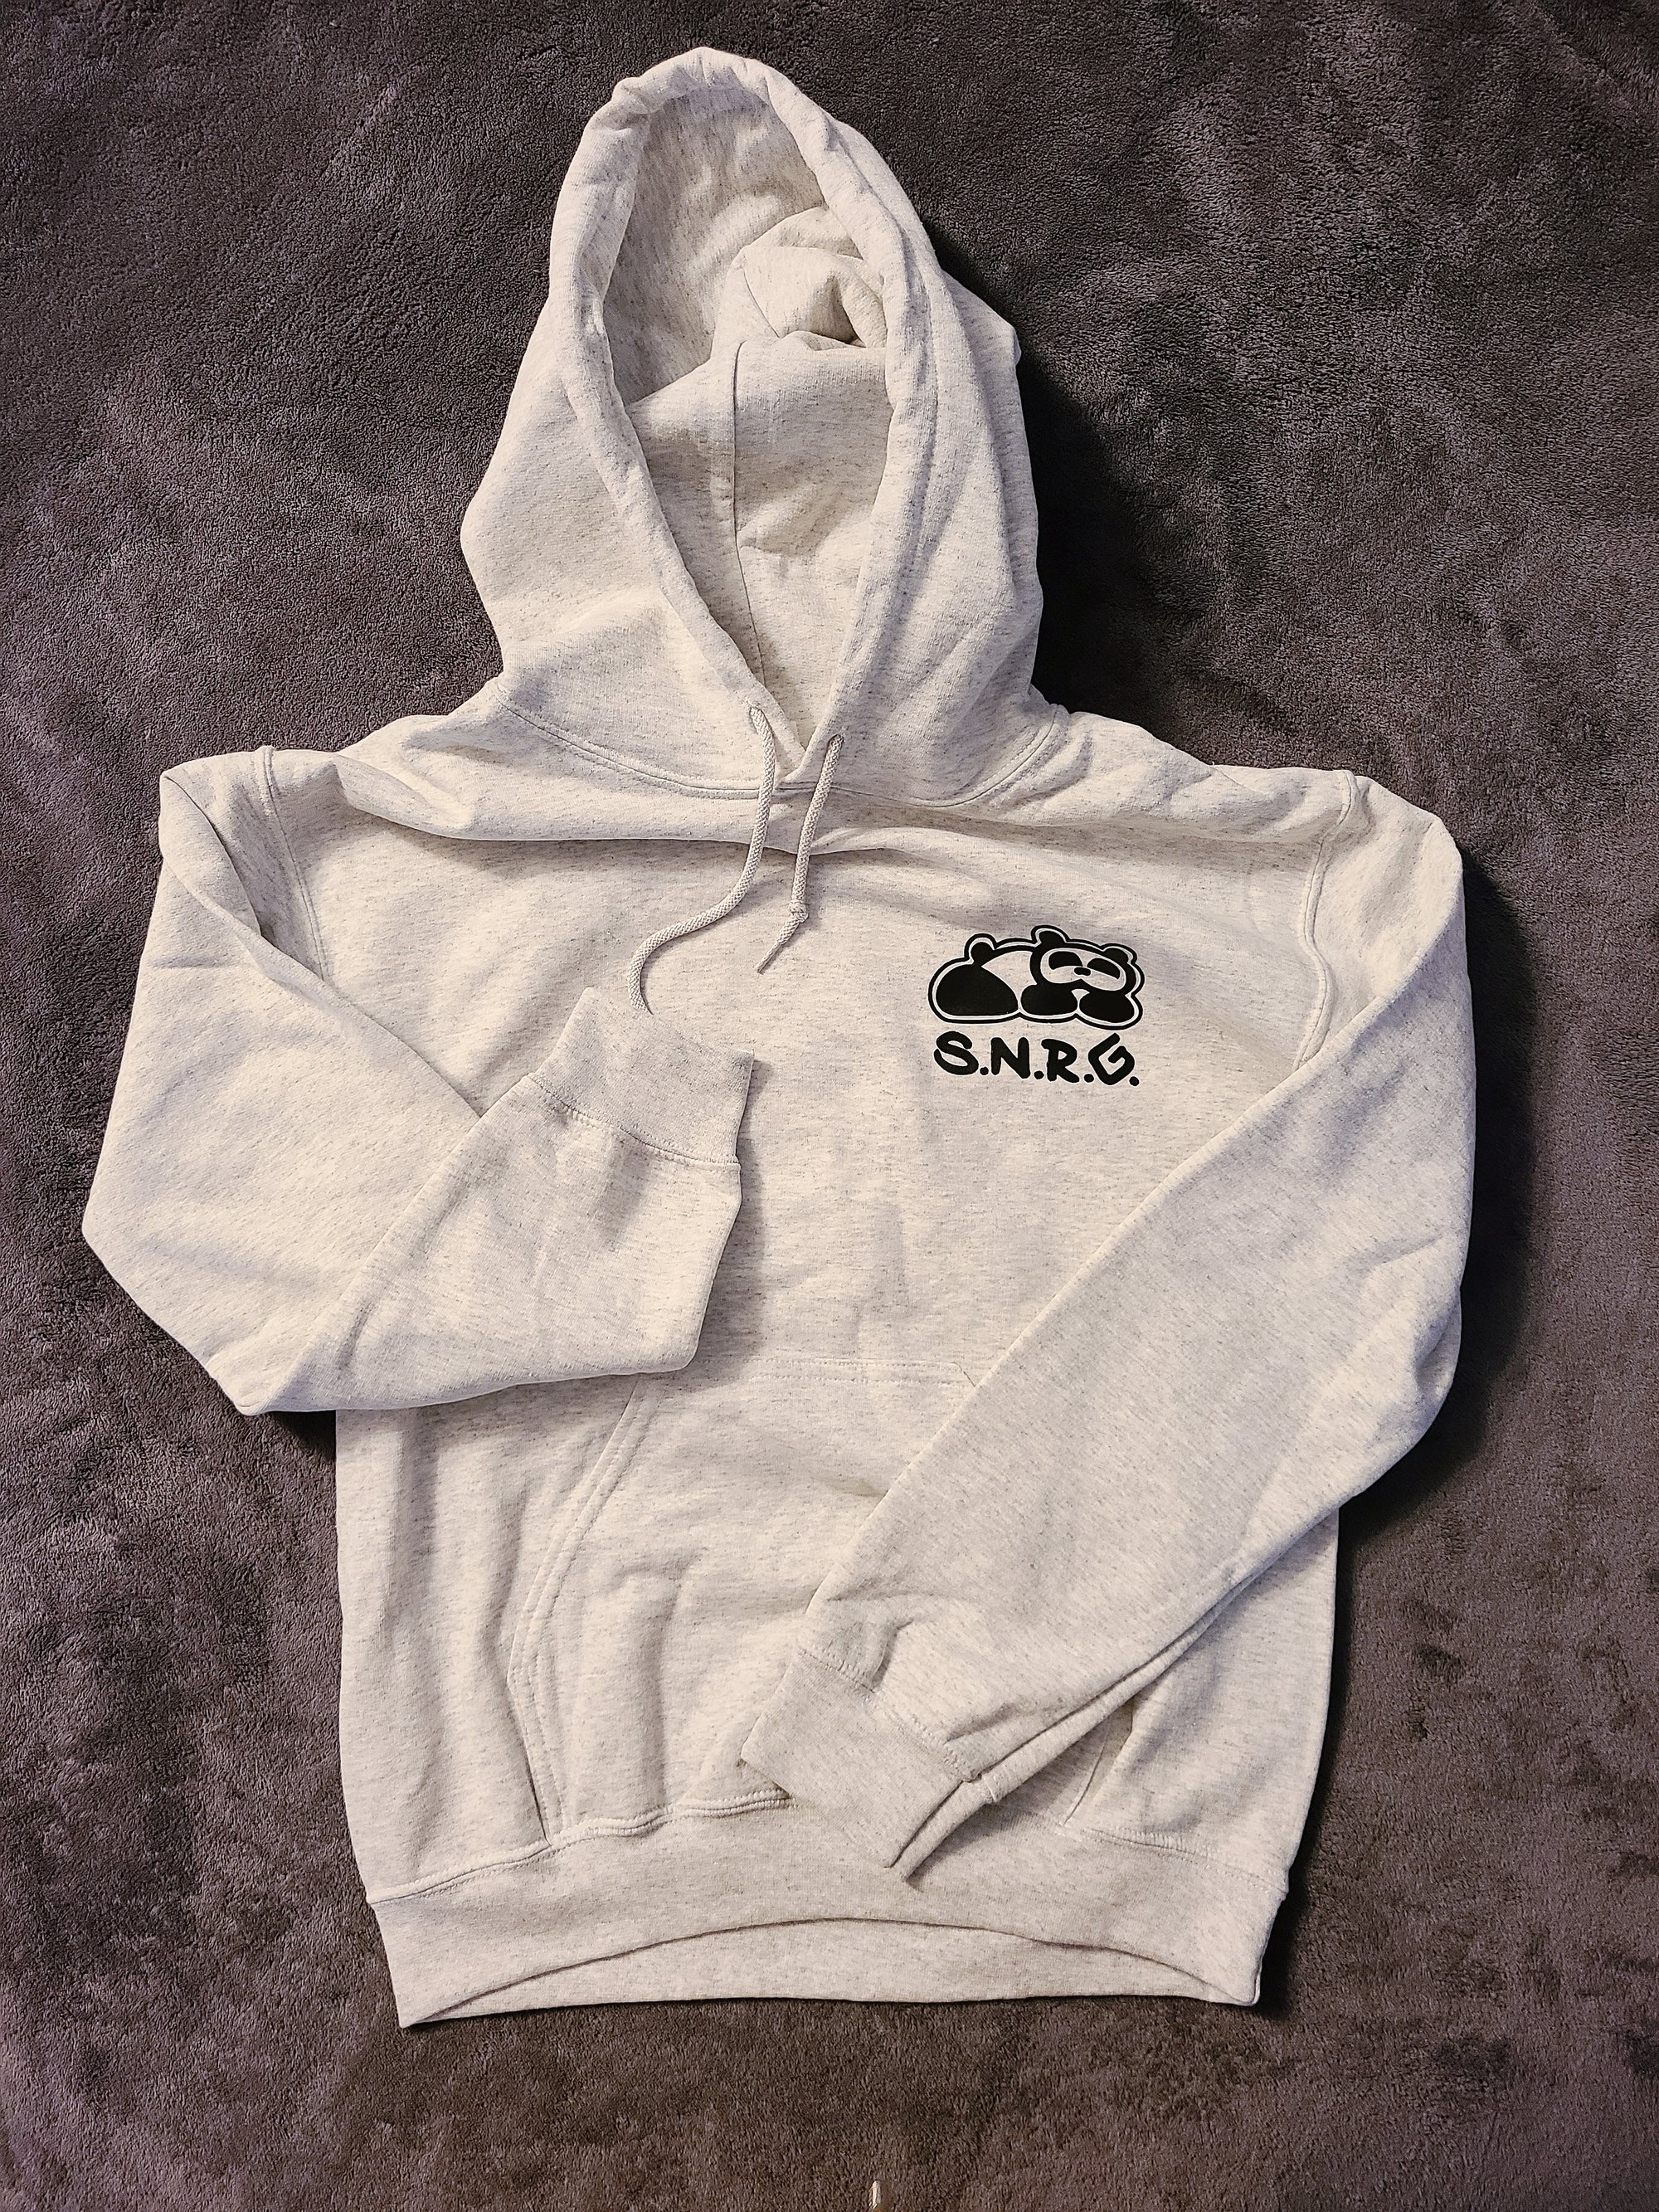 BABY MIDAS HOODIE | Some Never Really Get S.N.R.G.